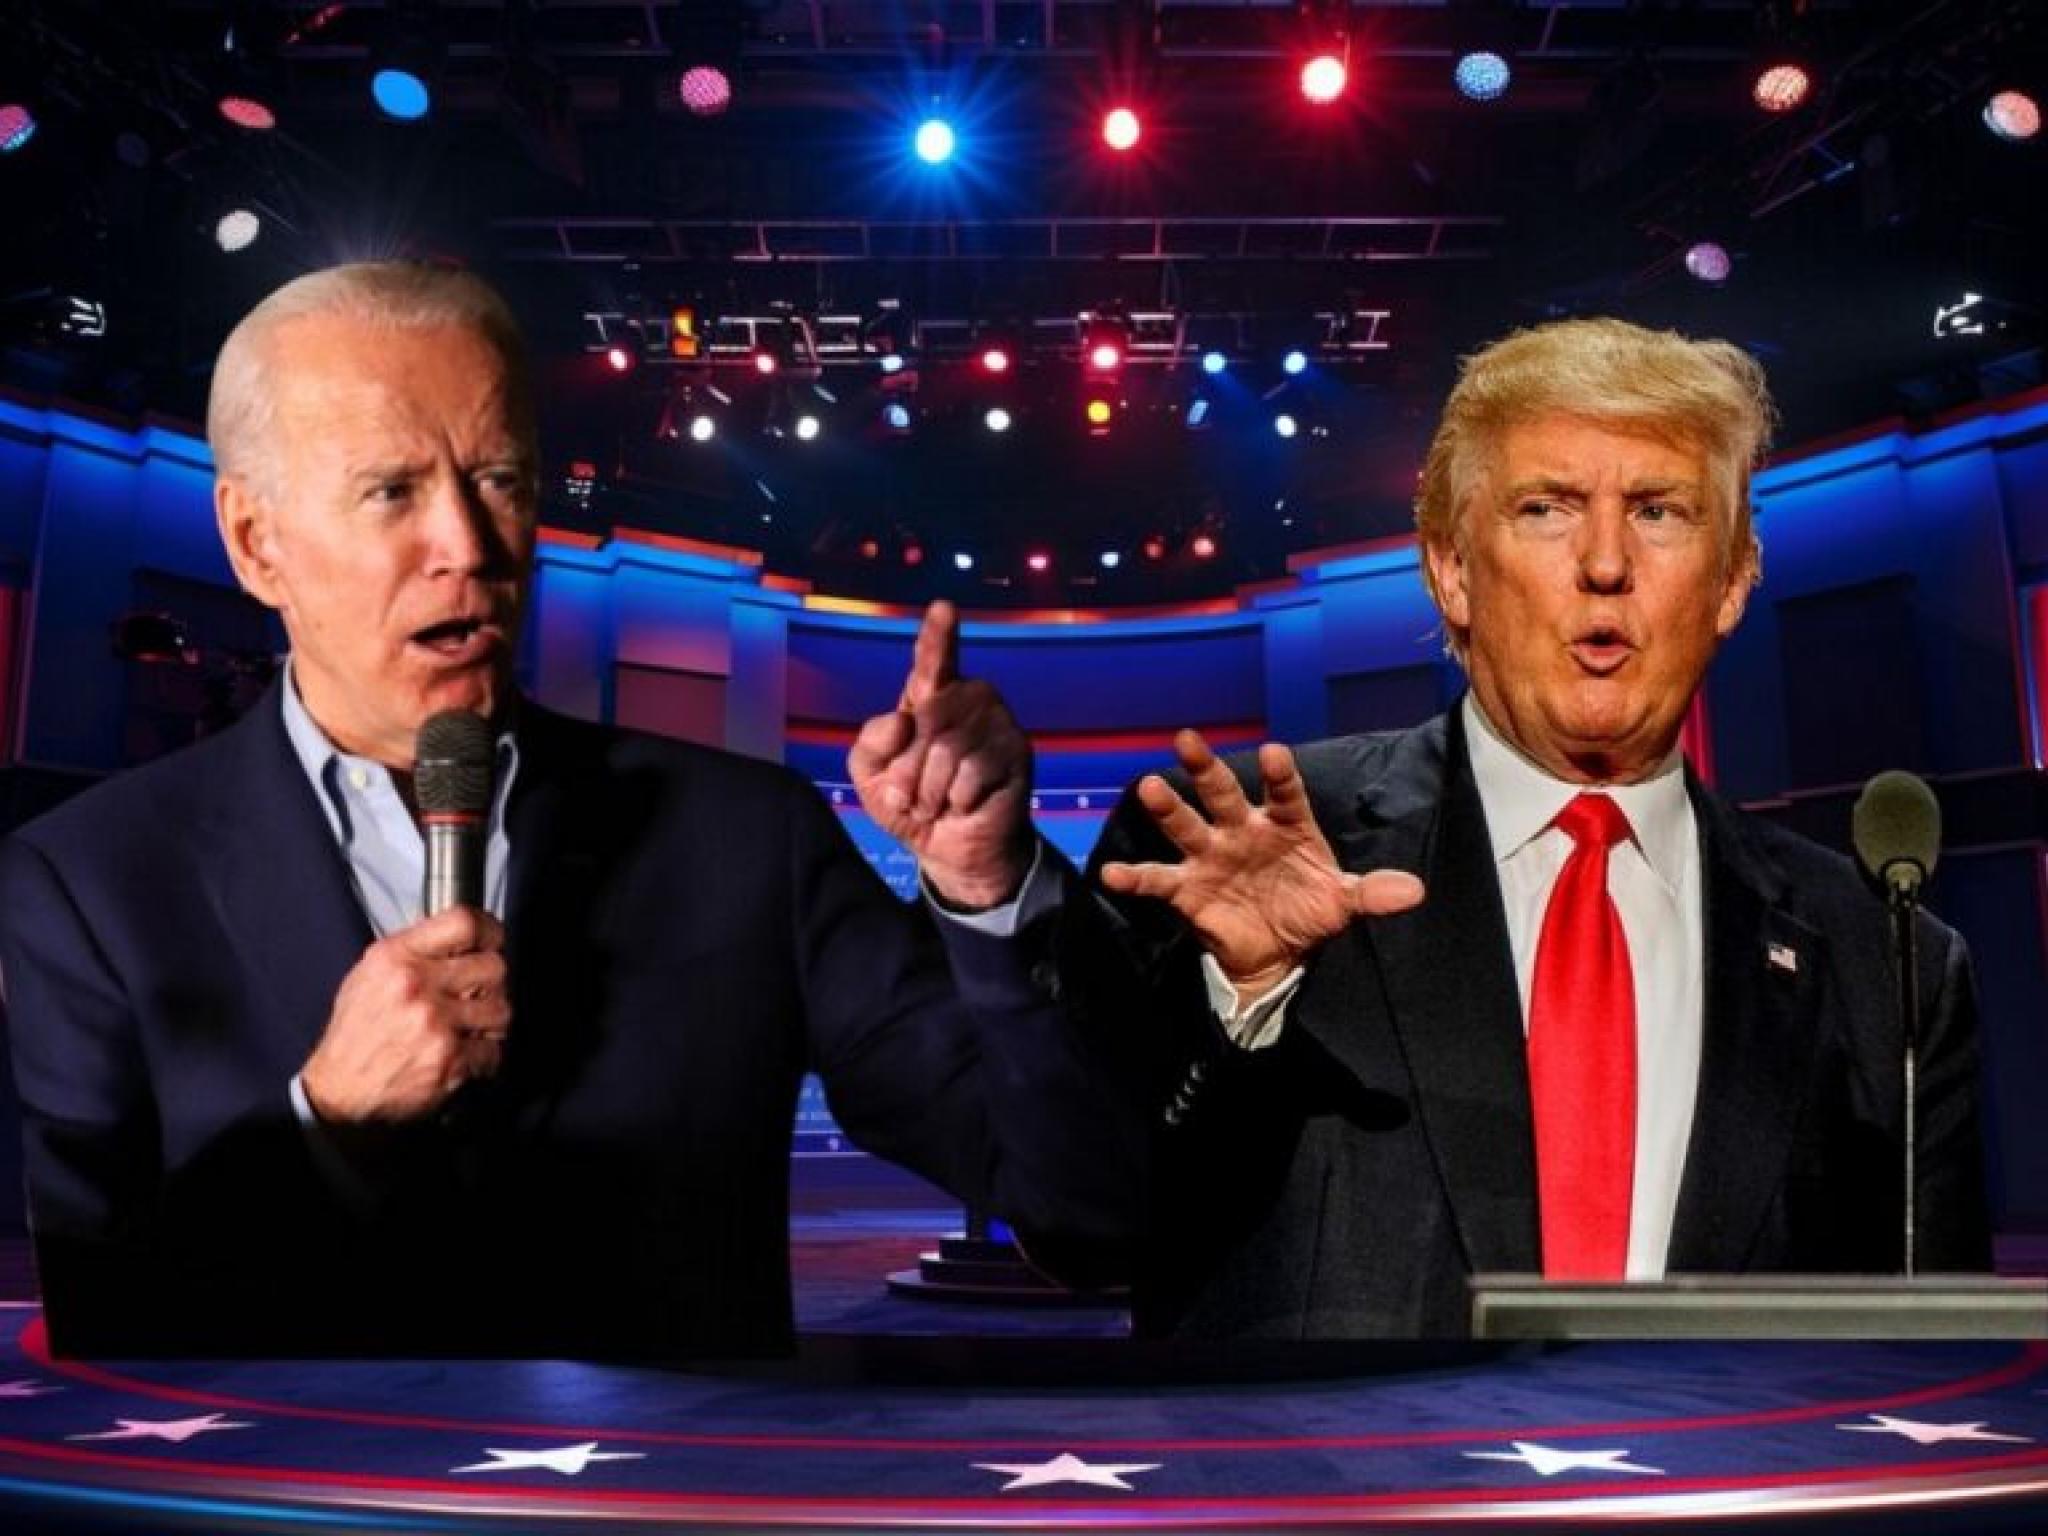  us-economy-at-stake-in-biden-vs-trump-debate-both-candidates-have-policies-that-are-inflationary 